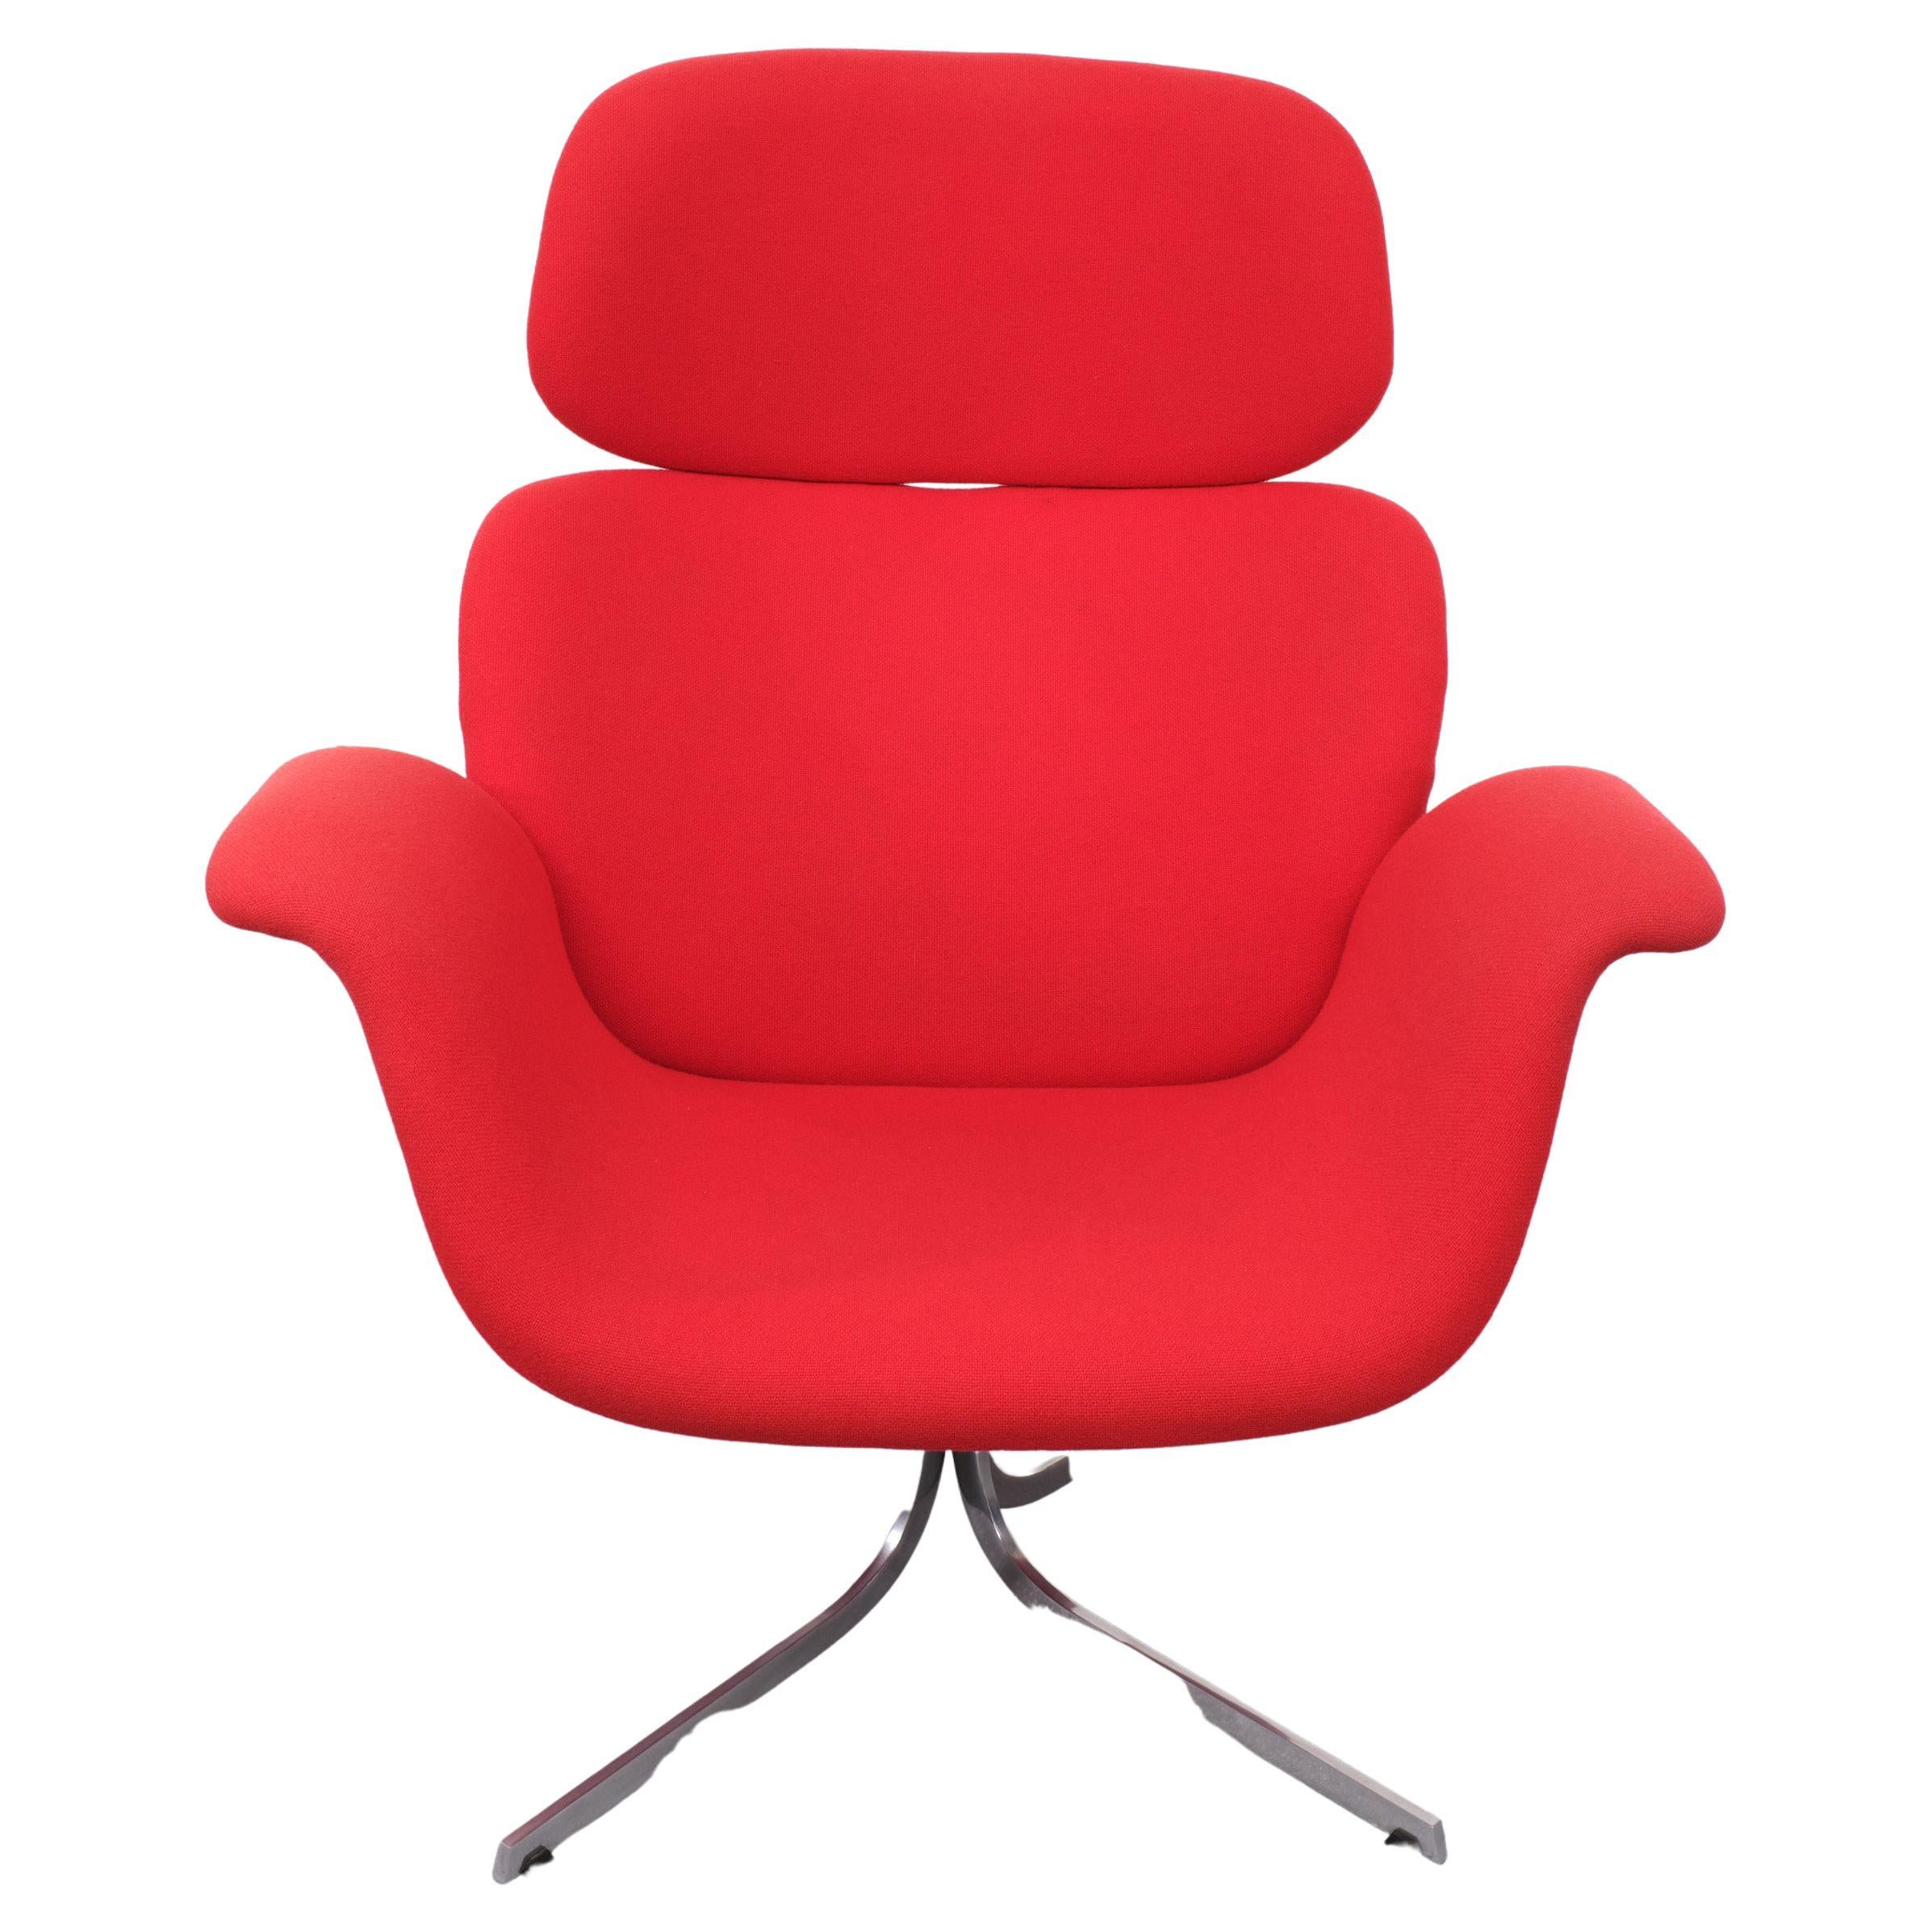 Beautiful Big Tulip Lounge chair .Pierre Paulin designed this iconic chair in 1965 .
for Artifort . Comes in a  Red wool upholstery . Star feet . not revolving .
Very good seating comfort . Good condition . 

Please don't hesitate to reach out for